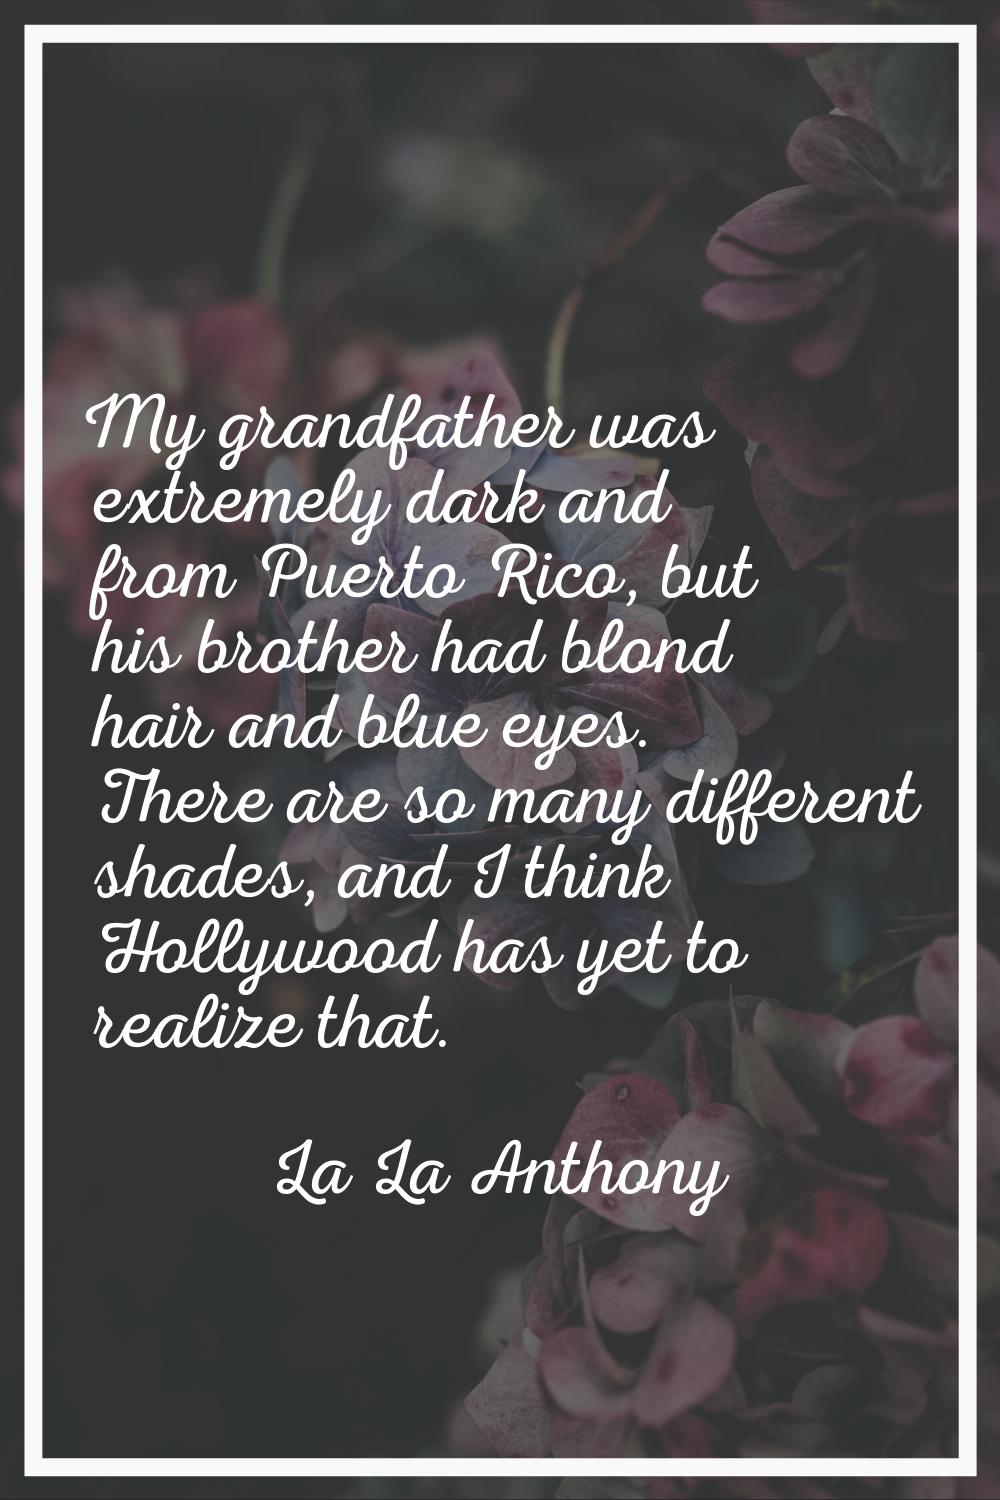 My grandfather was extremely dark and from Puerto Rico, but his brother had blond hair and blue eye